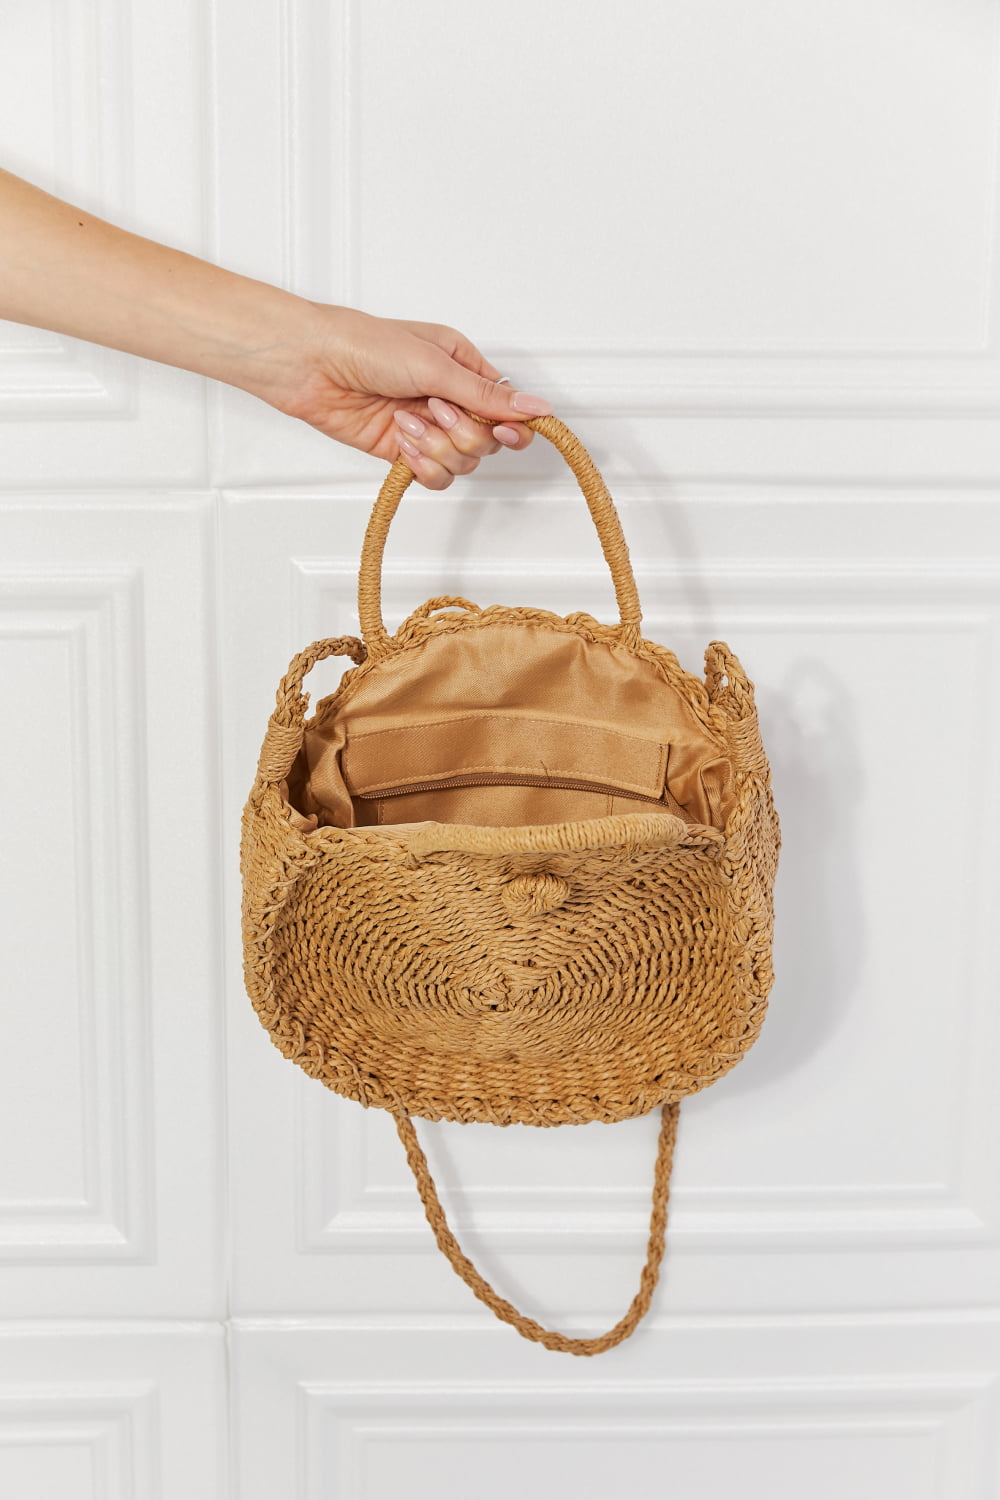 Justin Taylor Feeling Cute Rounded Rattan Handbag in Camel  Sunset and Swim   